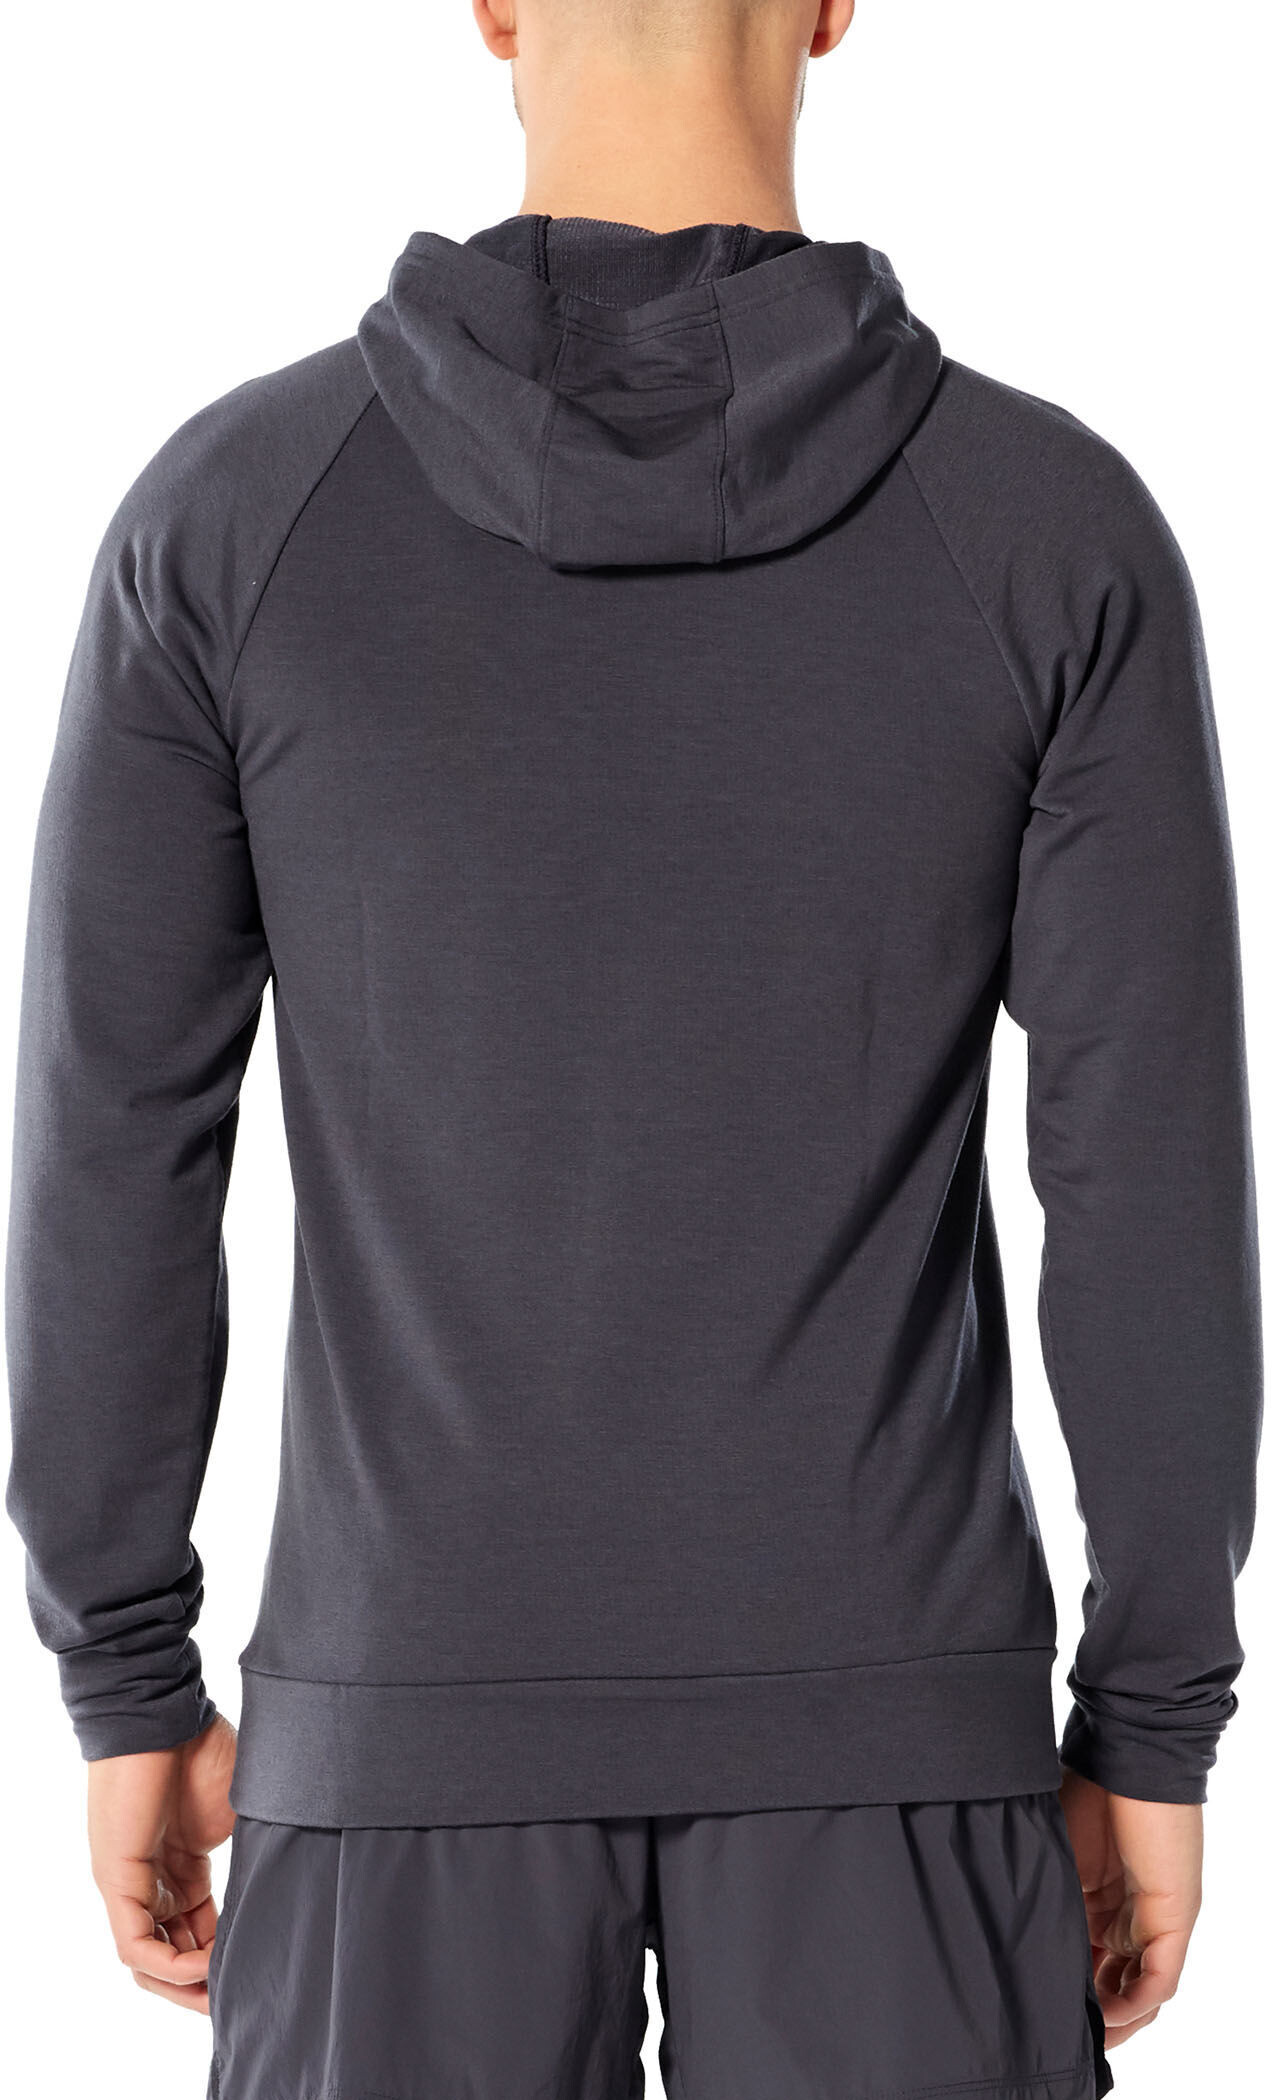 Icebreaker Momentum Hooded Pullover Men panther at addnature.co.uk